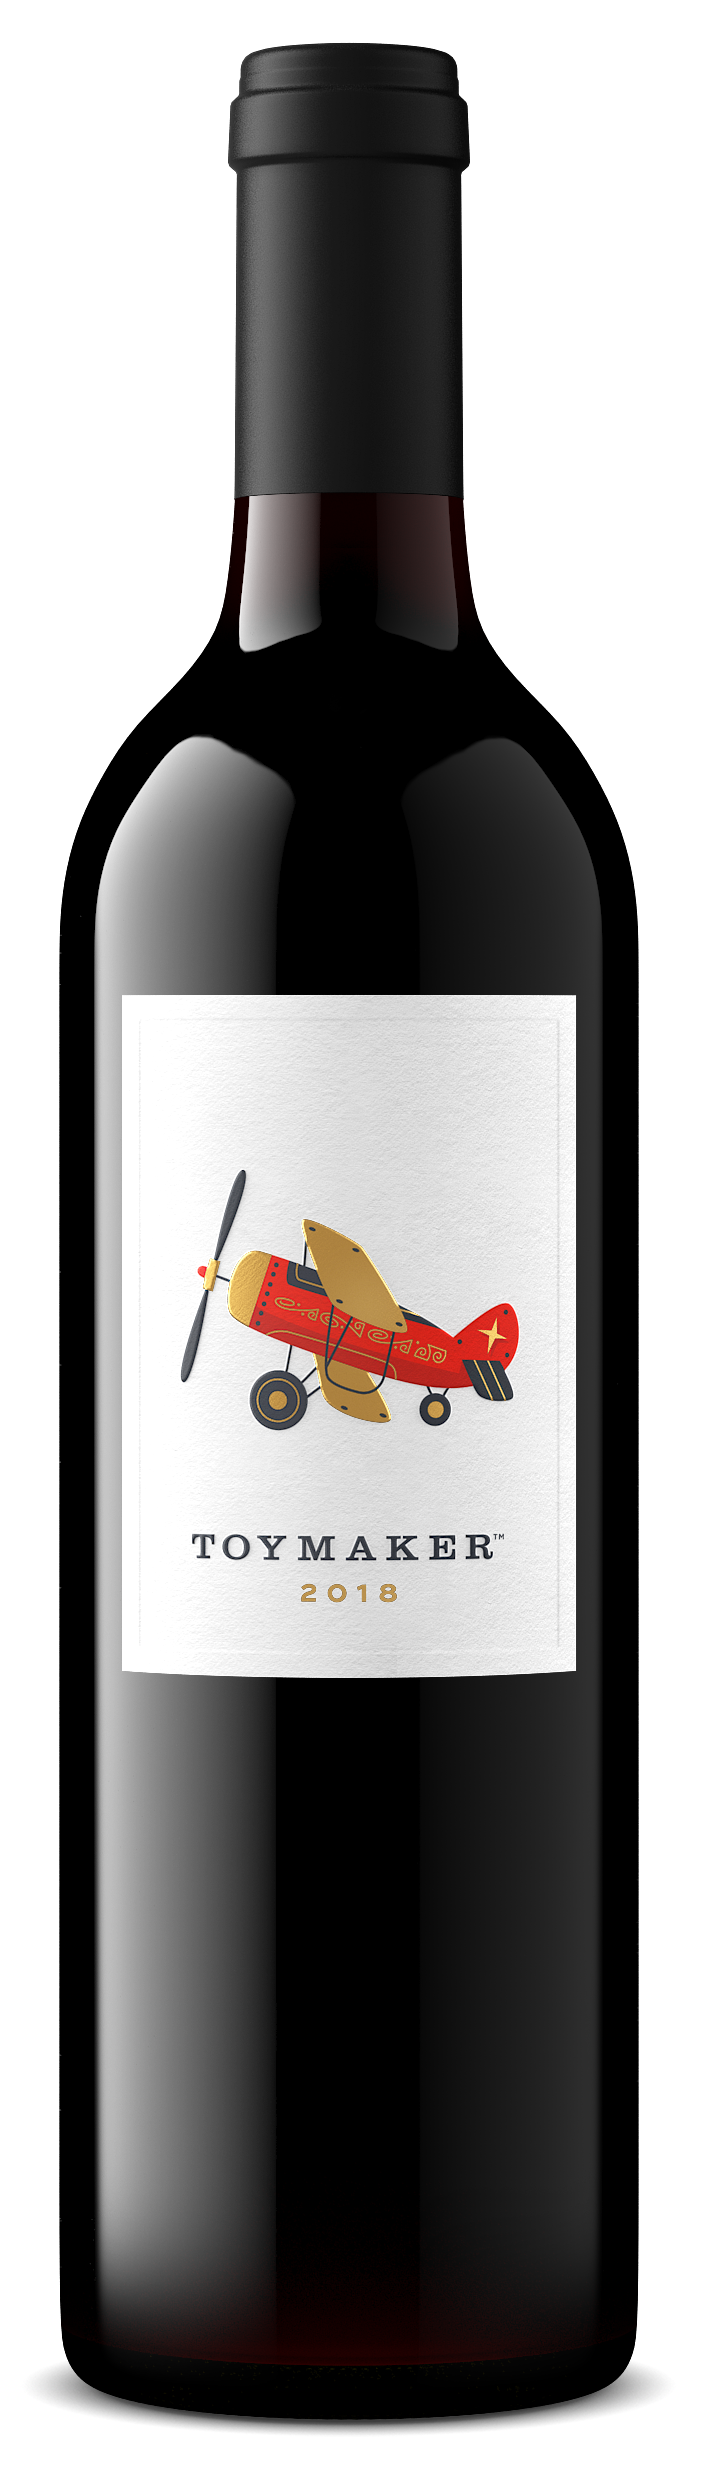 2018 ToyMaker Cellars Cabernet Sauvignon, Red Wine, Napa Valley, California, made by winemaker Martha McClellan of Sloan Estate, Checkerboard Vineyards, Levy & McClellan, and formerly of Harlan Estate. Best Napa Valley Grand Cru red wines.